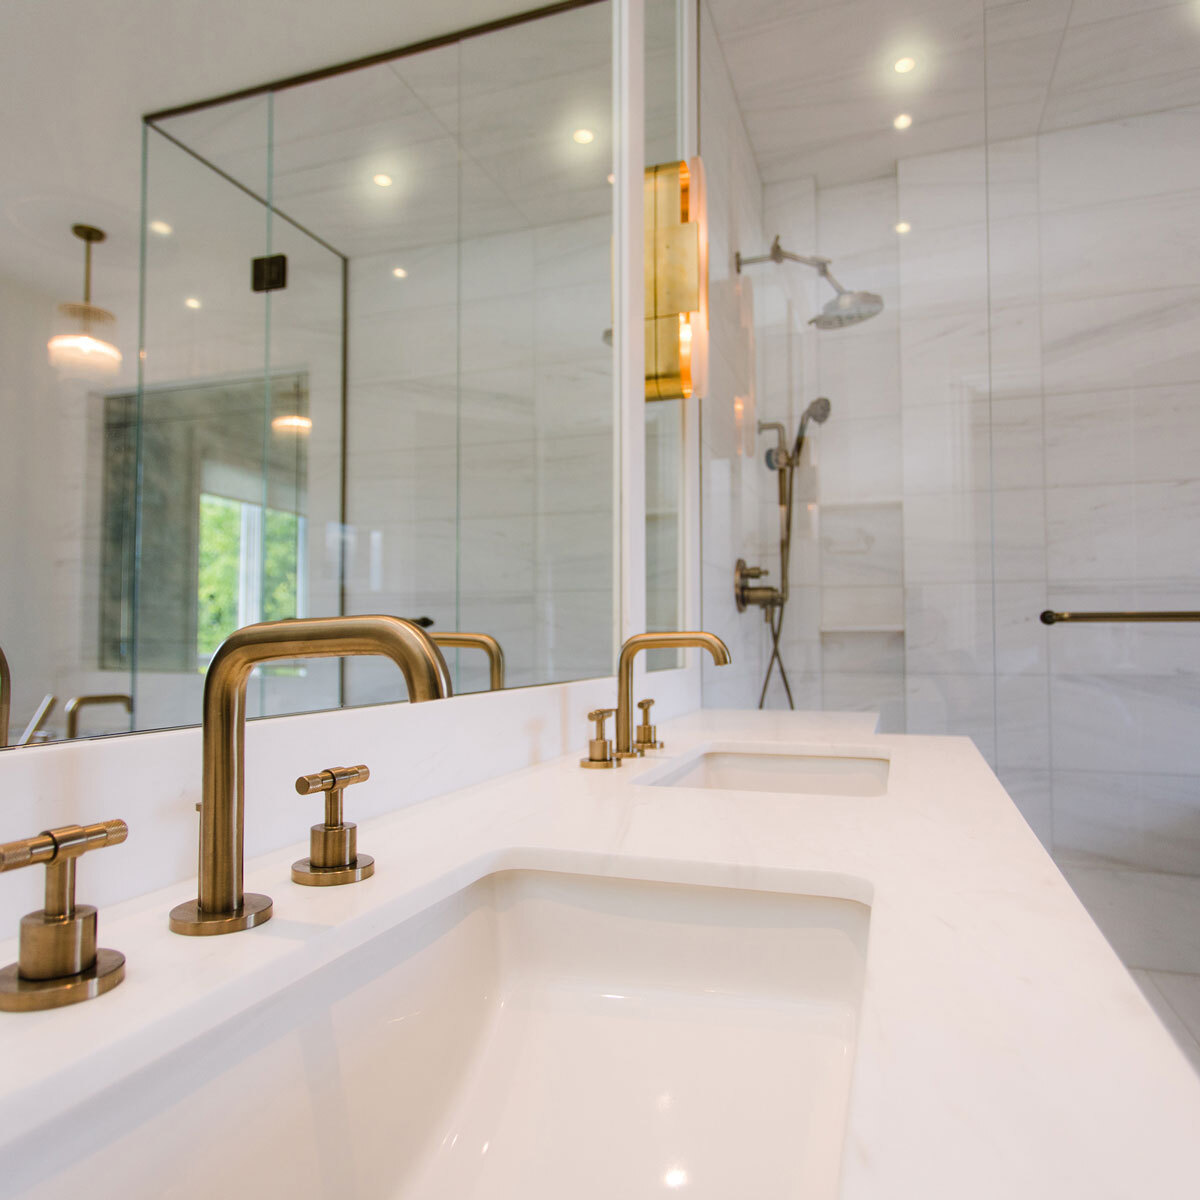 Lifestyle image of lights in bathroom setting